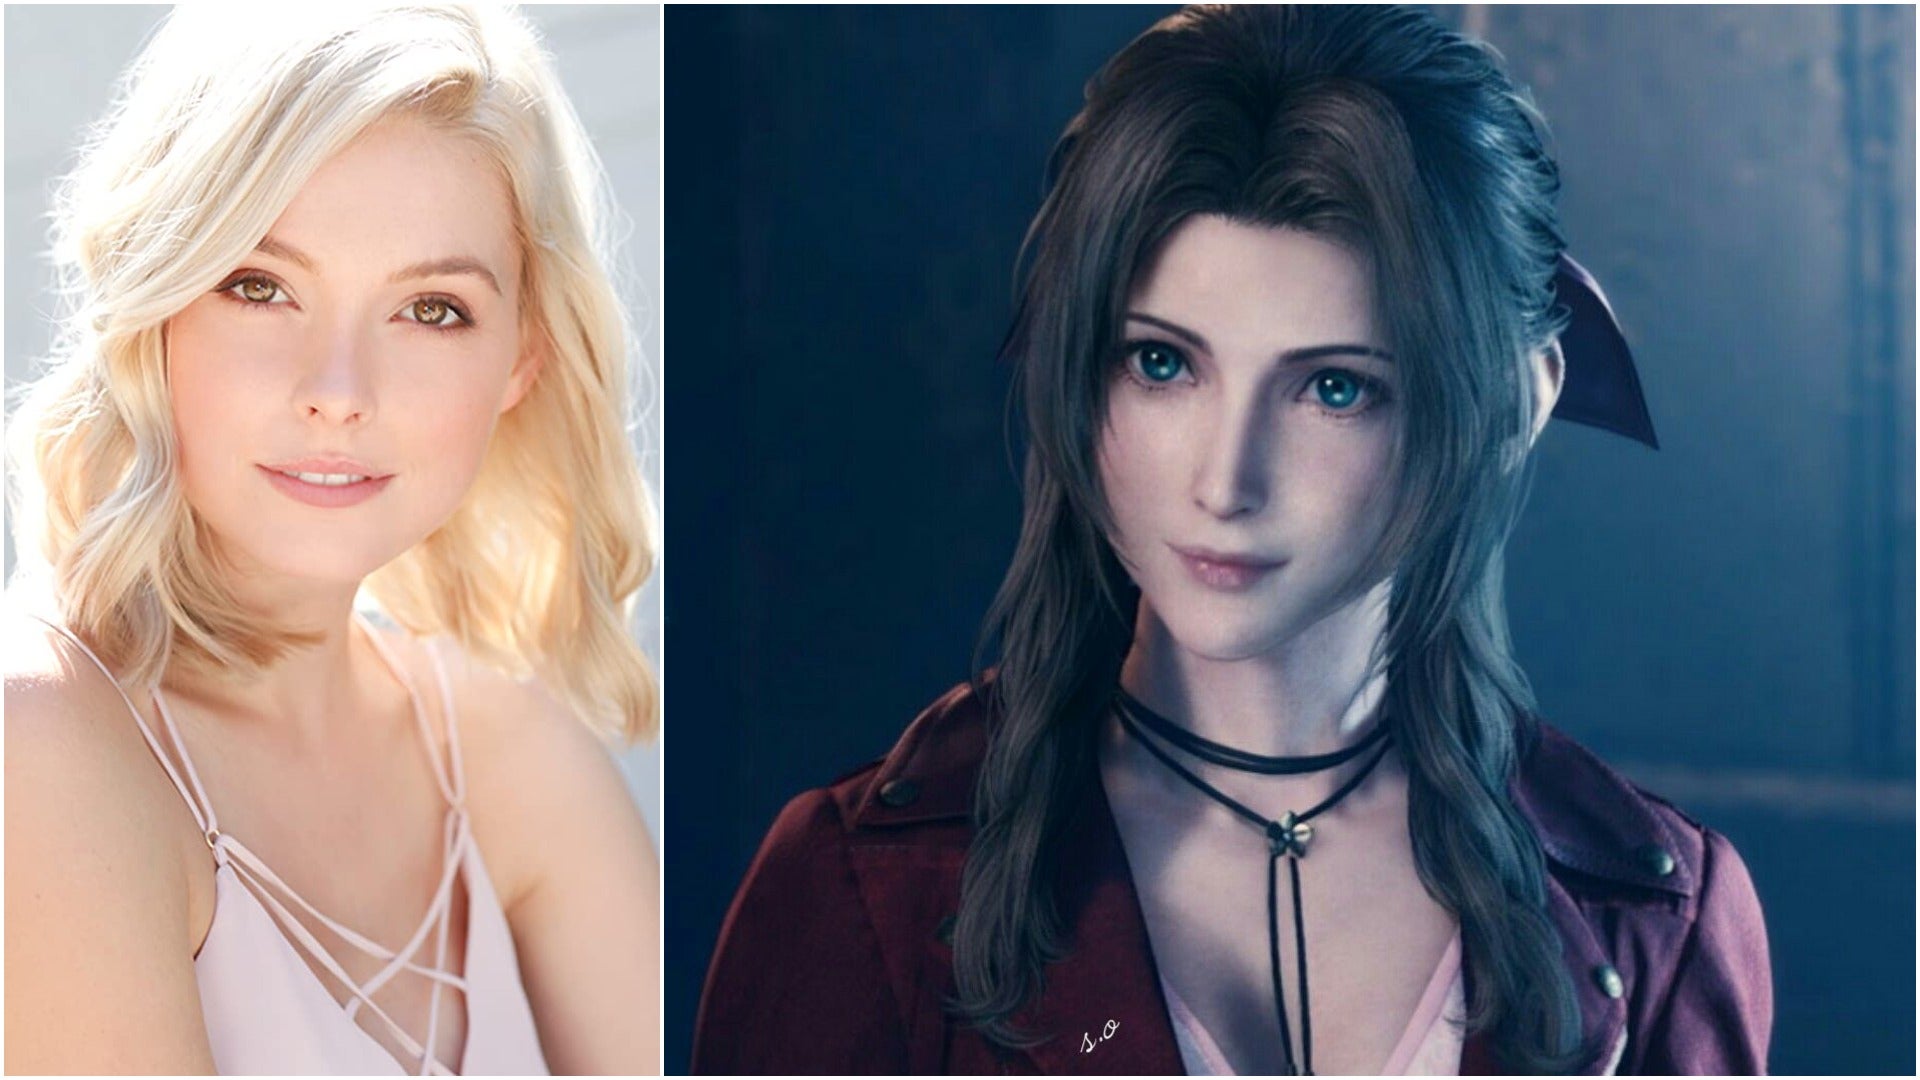 The voice actor of Aerith in FF7 Remake cosplaying her own 